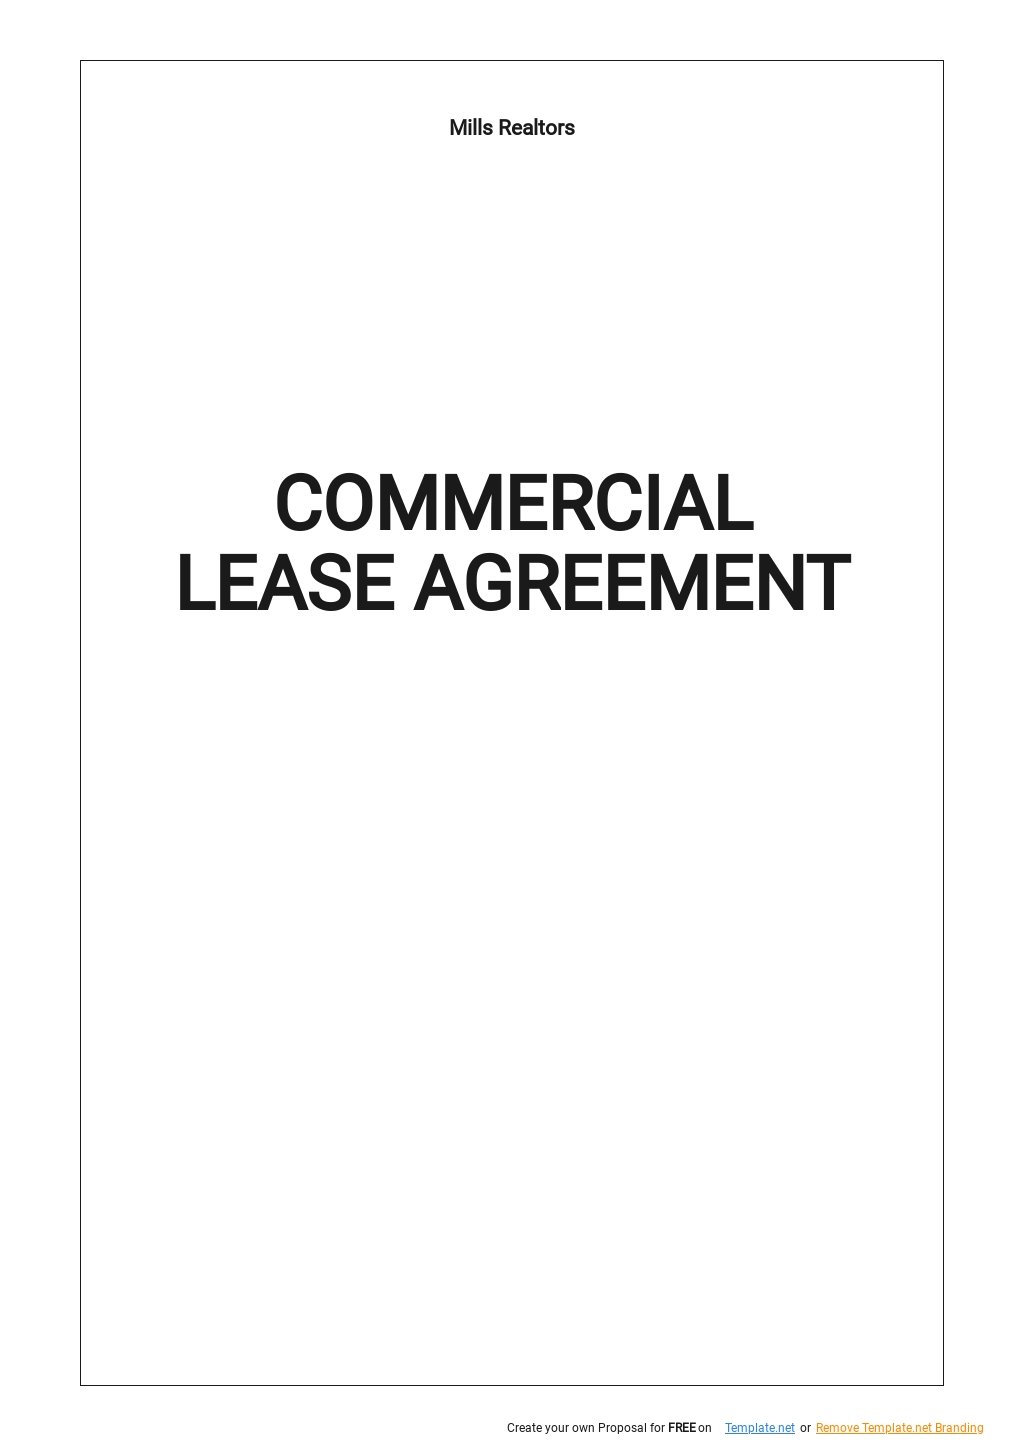 Simple Commercial Lease Agreement Template.jpe